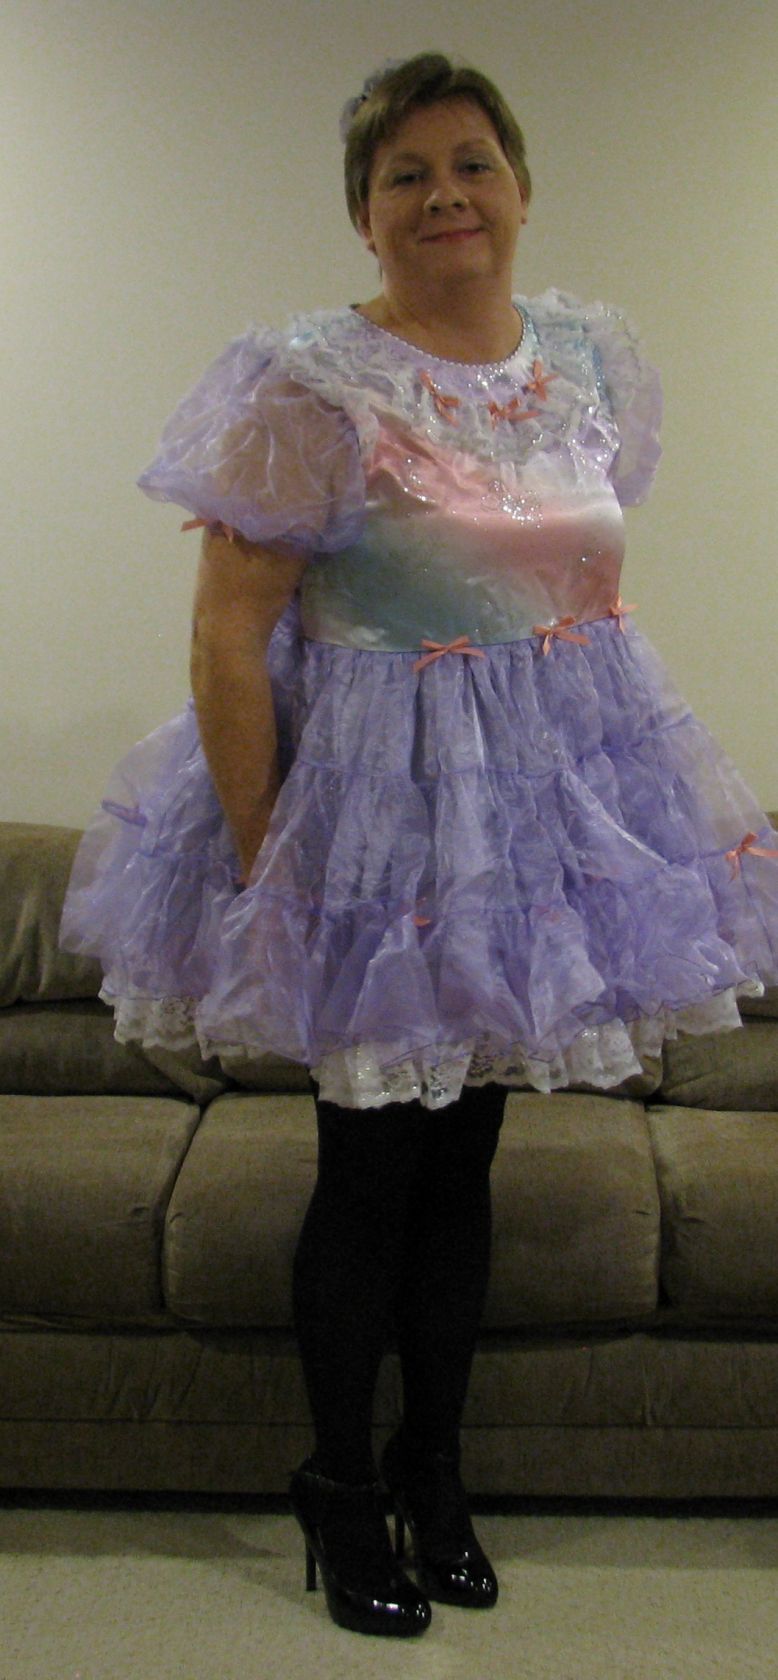 Chrisissy in Lilac Sissy Dress IMG 3825 web site